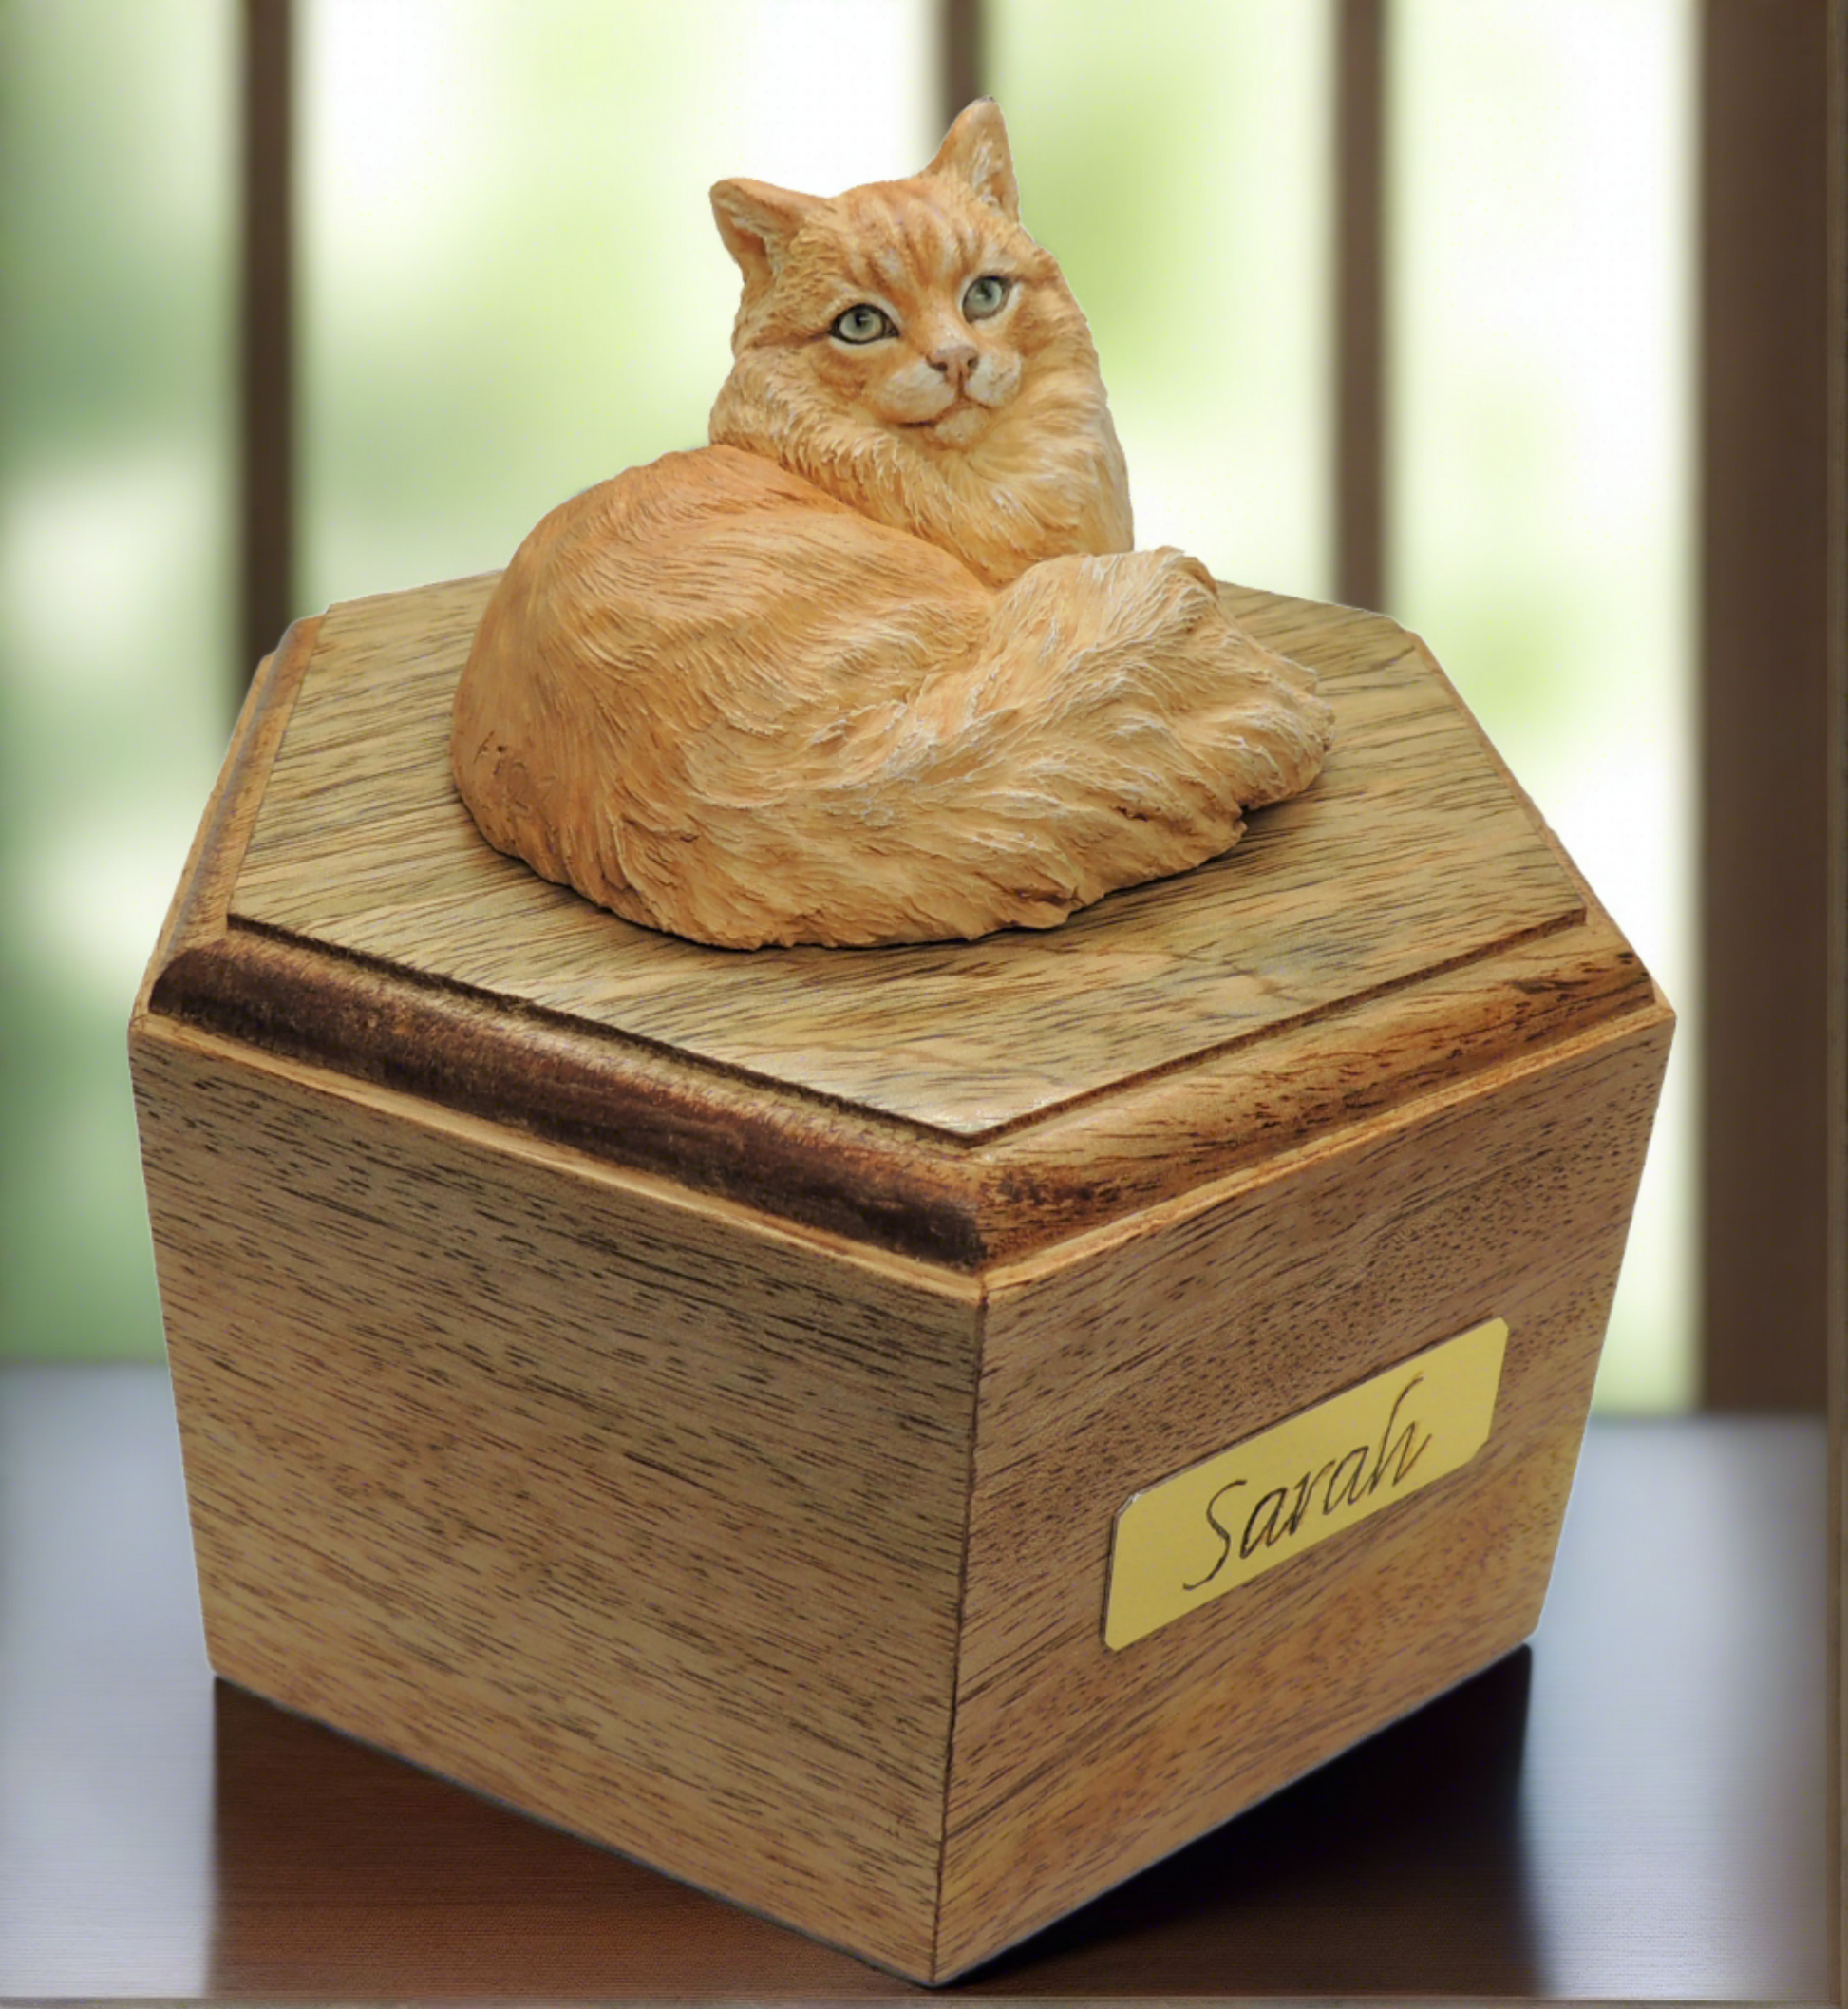 Marmalade long haired cat sculpture